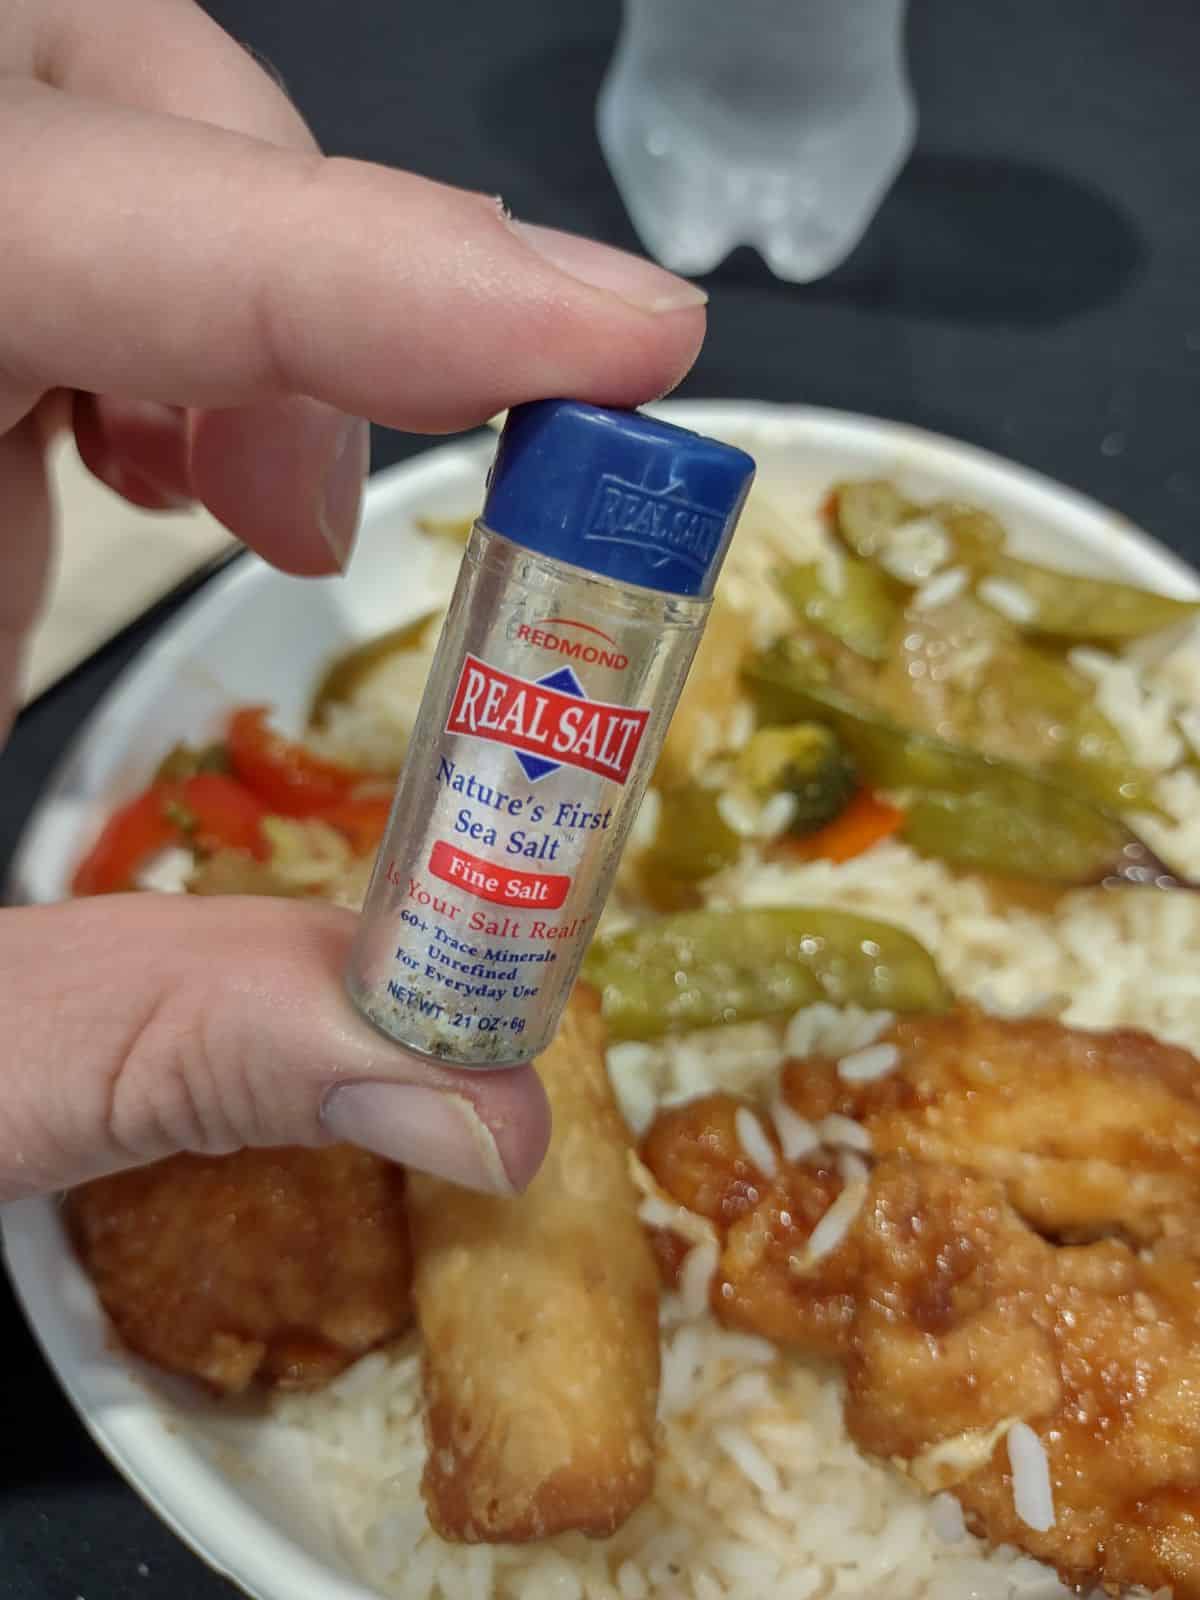 Holding a mini Redmond Real Salt shaker over top a plate of Chinese food with chicken, rice, and veggies.